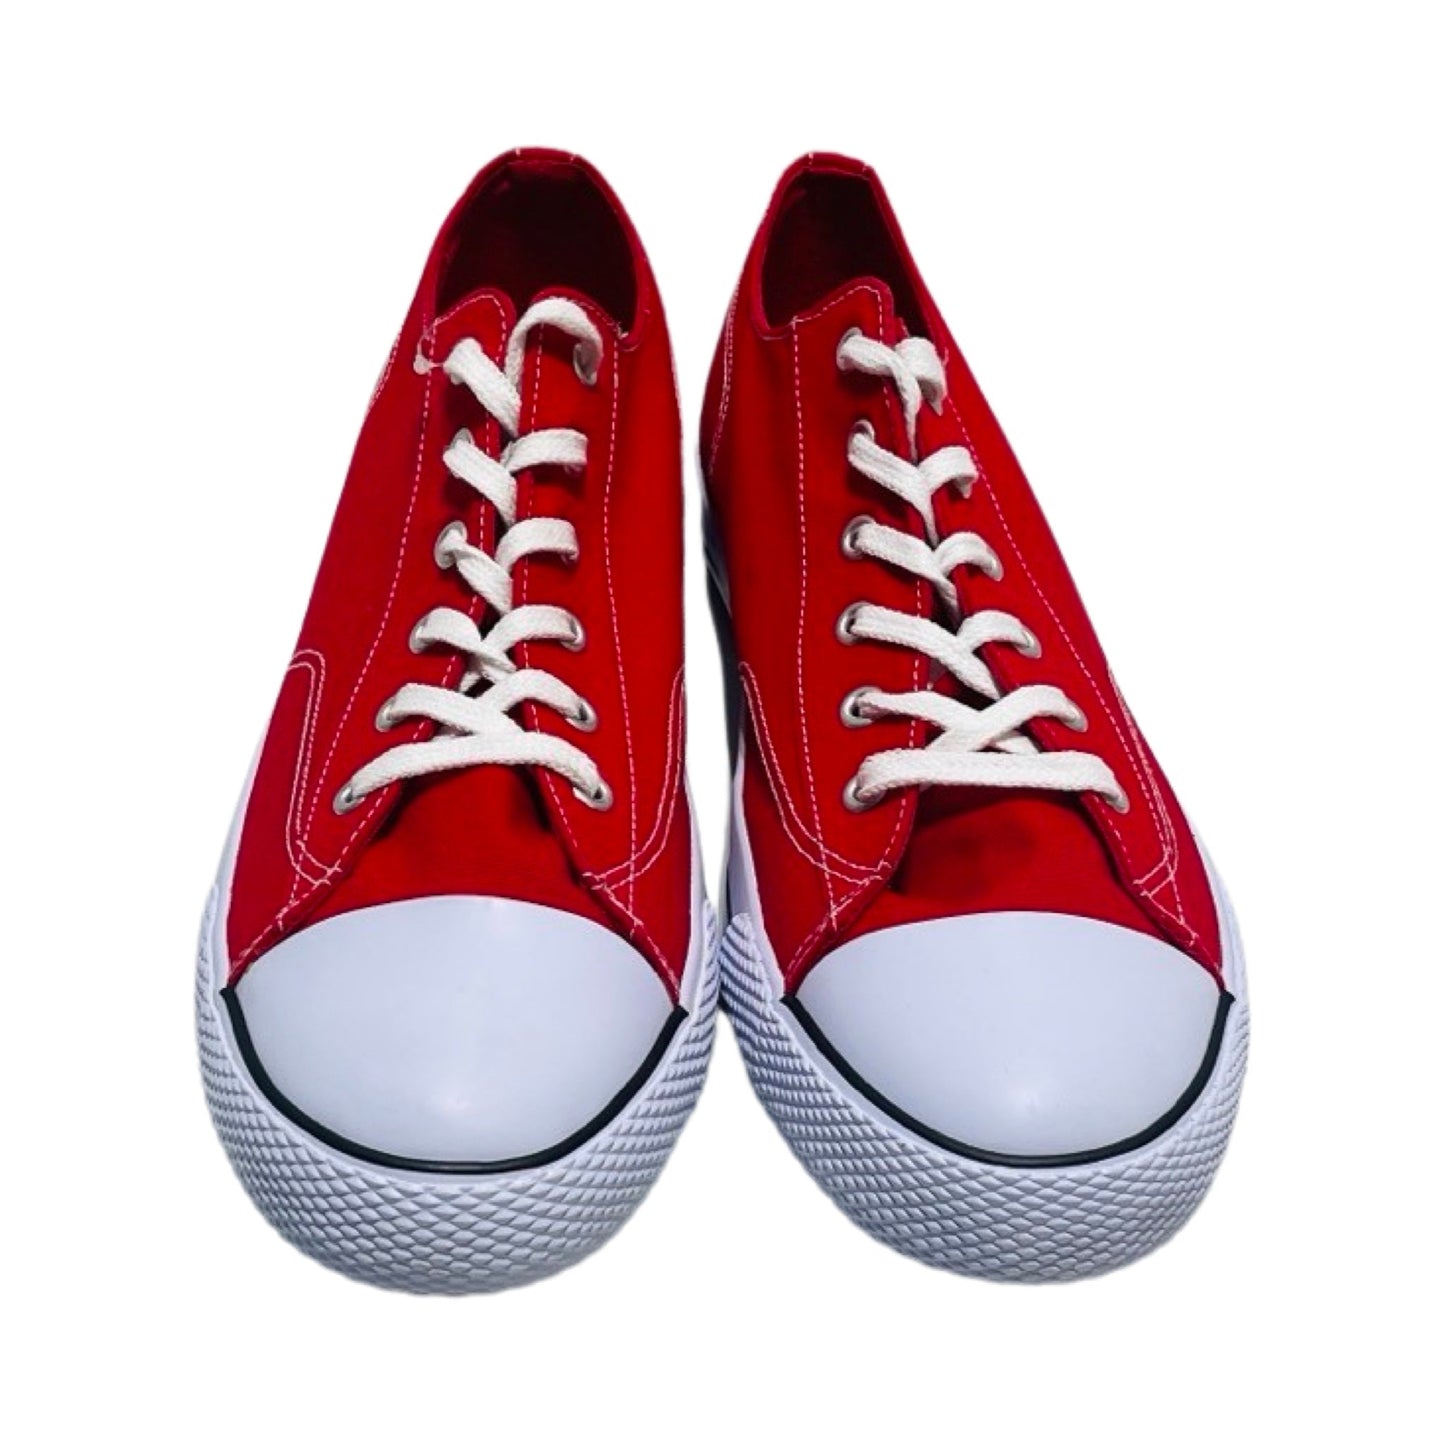 Red & White Shoes Sneakers By Airwalk Size: 15